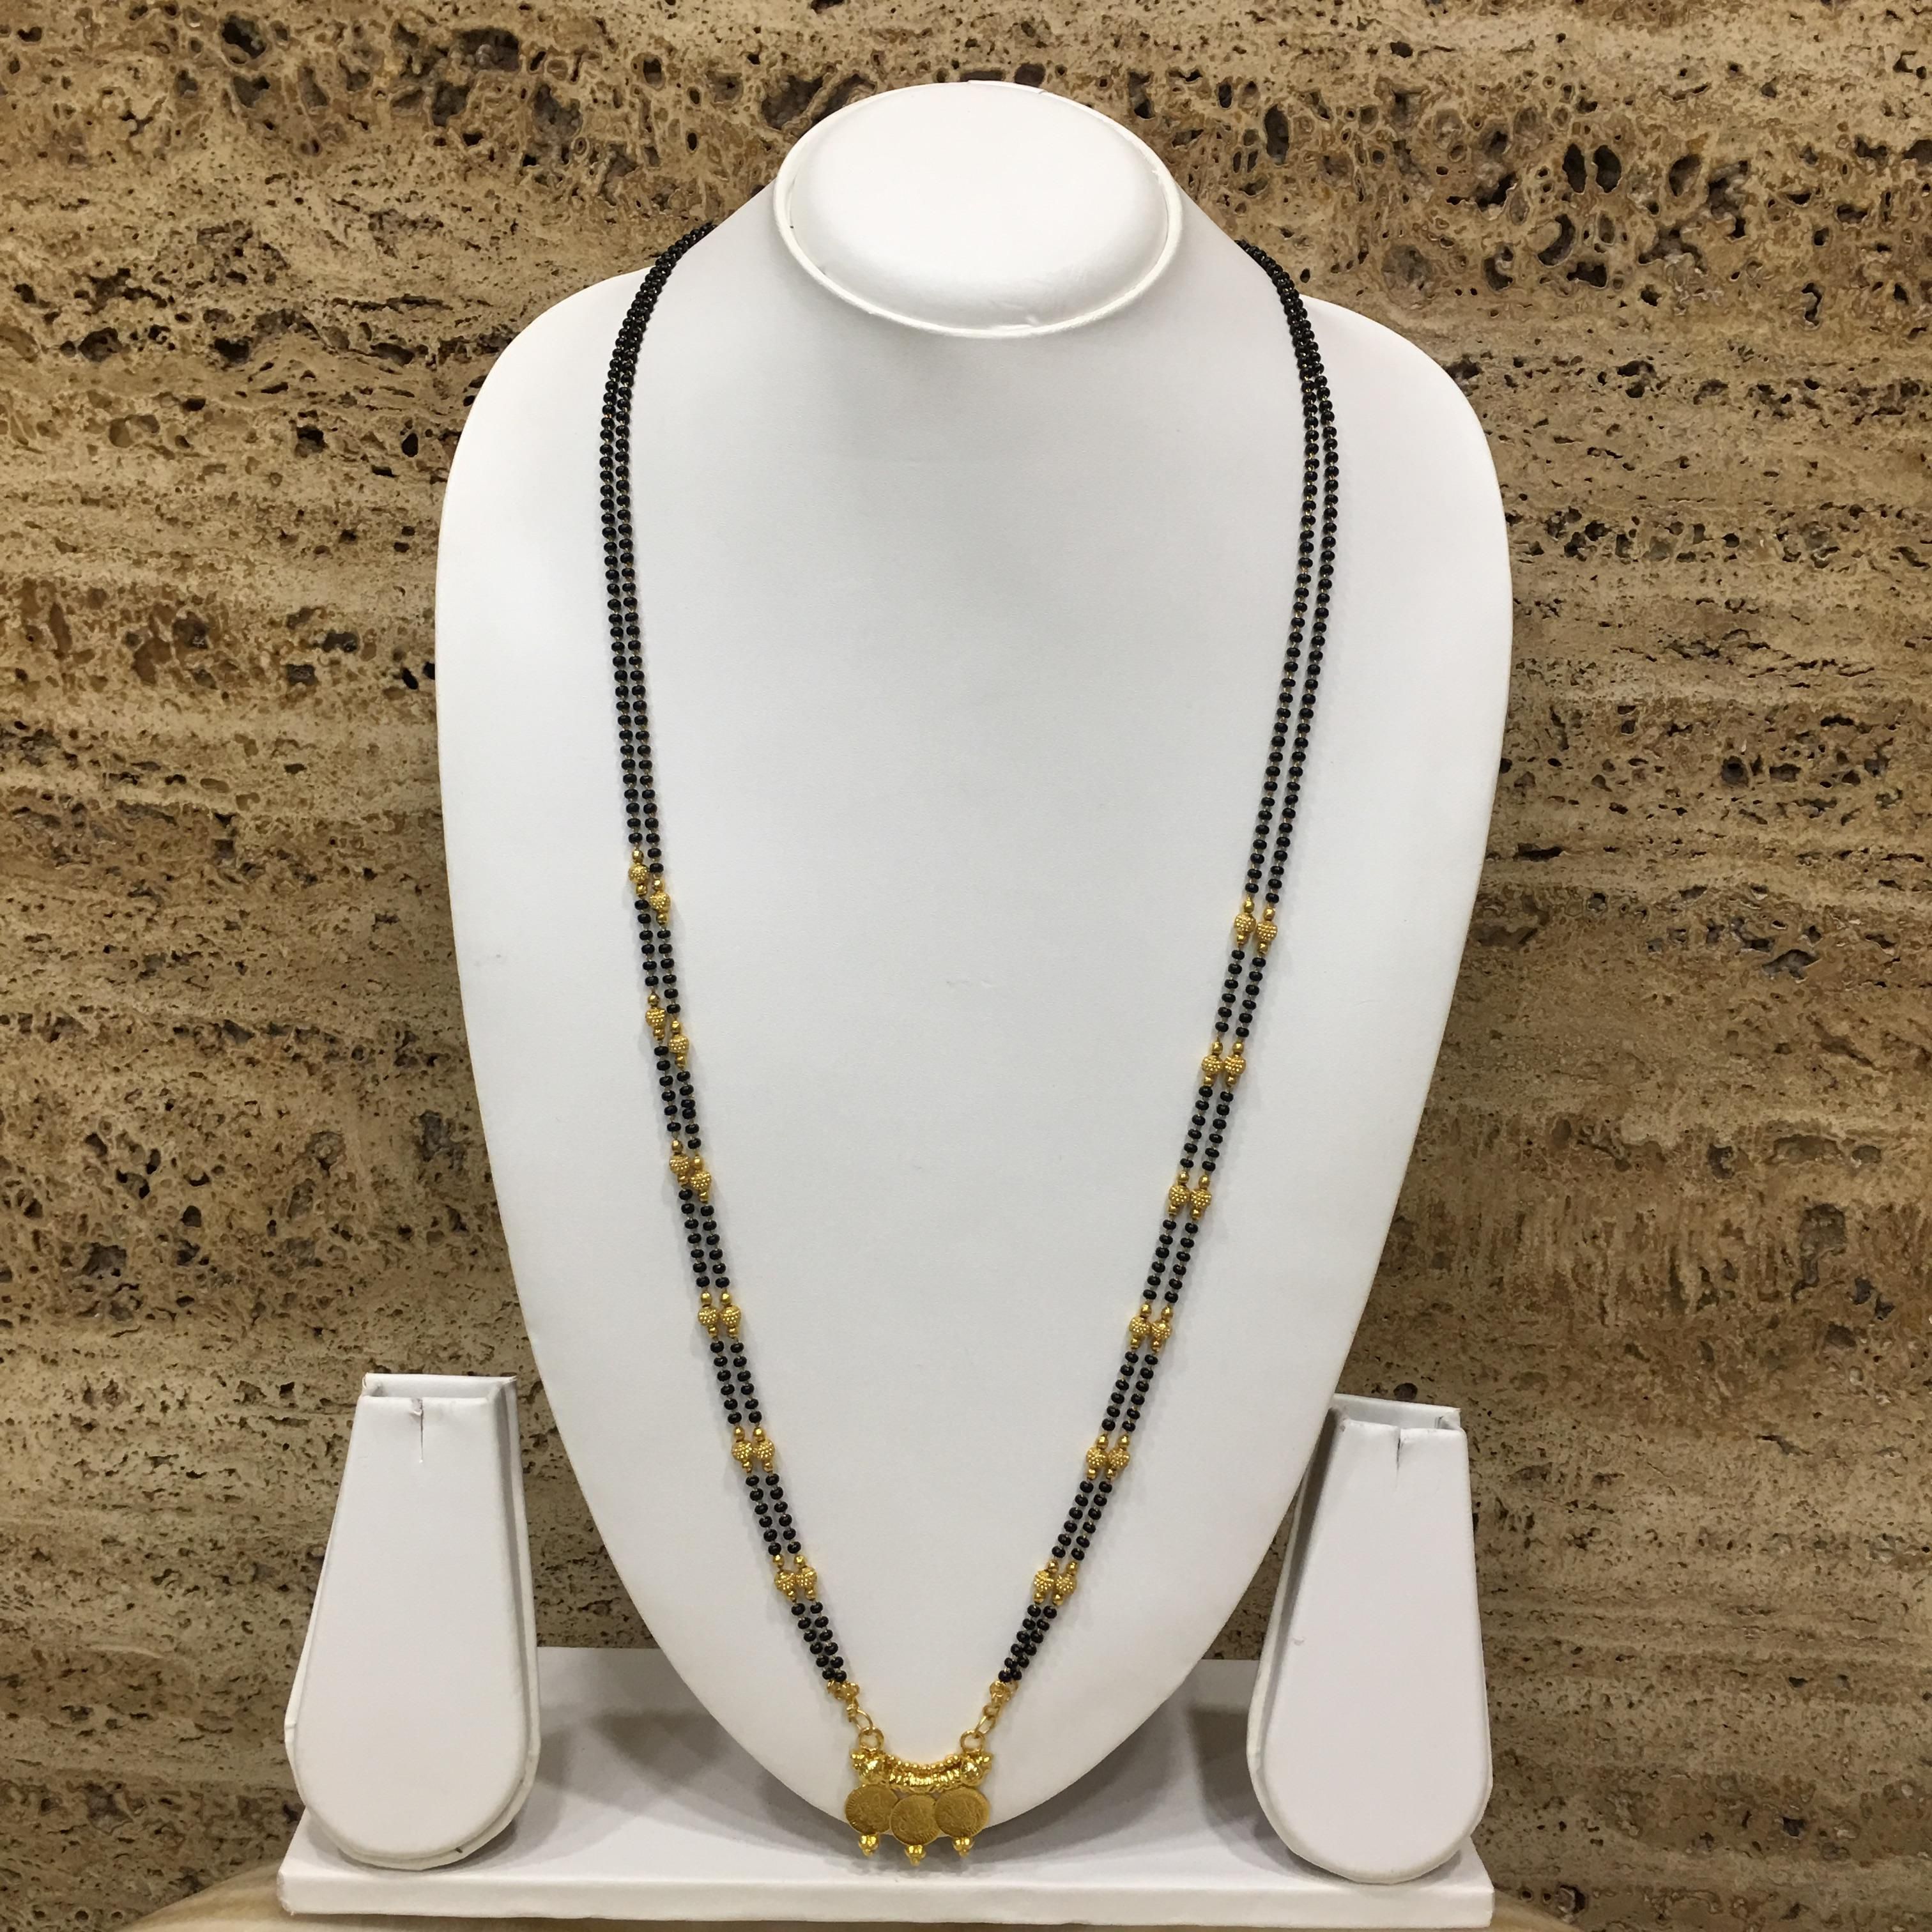     			Digital Dress Women's Jewellery Gold Plated Mangalsutra Necklace 32-inch Length Chain Golden 3 Laxmi Coin Vati Tanmaniya Pendant Traditional Black & Gold Beads Double Line Layer Long Mangalsutra